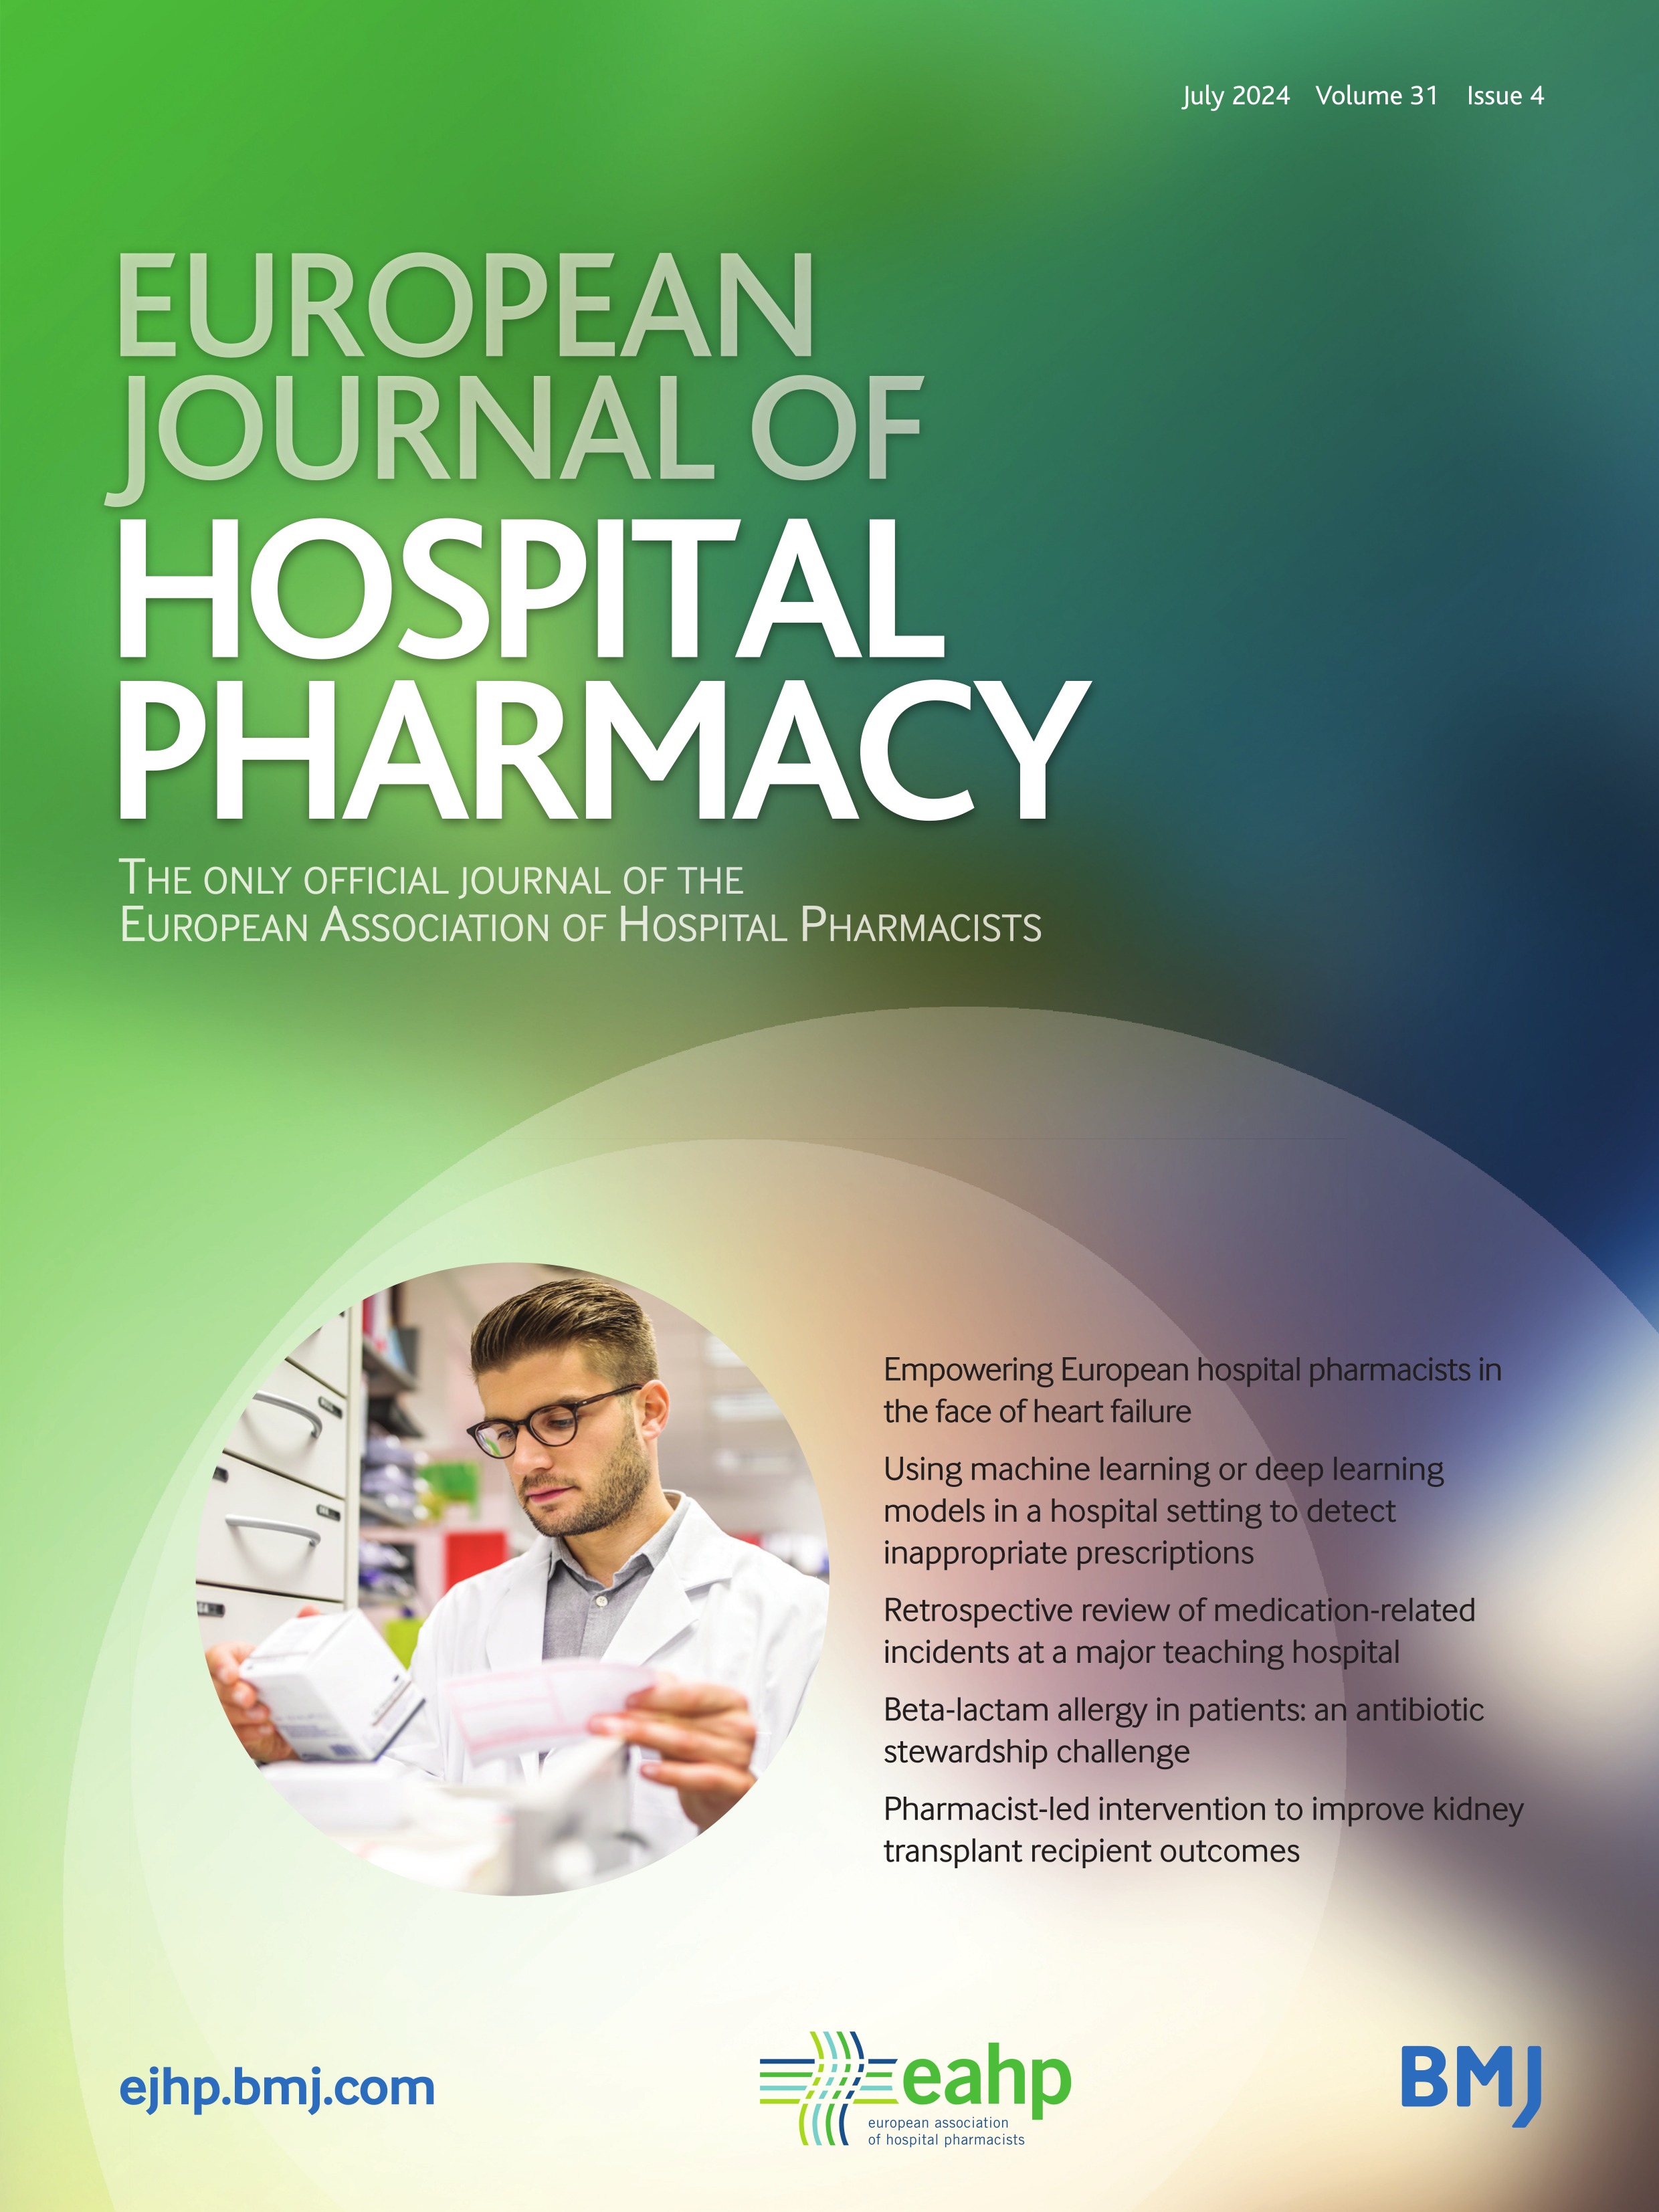 Formulation and stability study of an oral paediatric phenobarbital 1% solution containing hydroxypropyl-{beta}-cyclodextrins